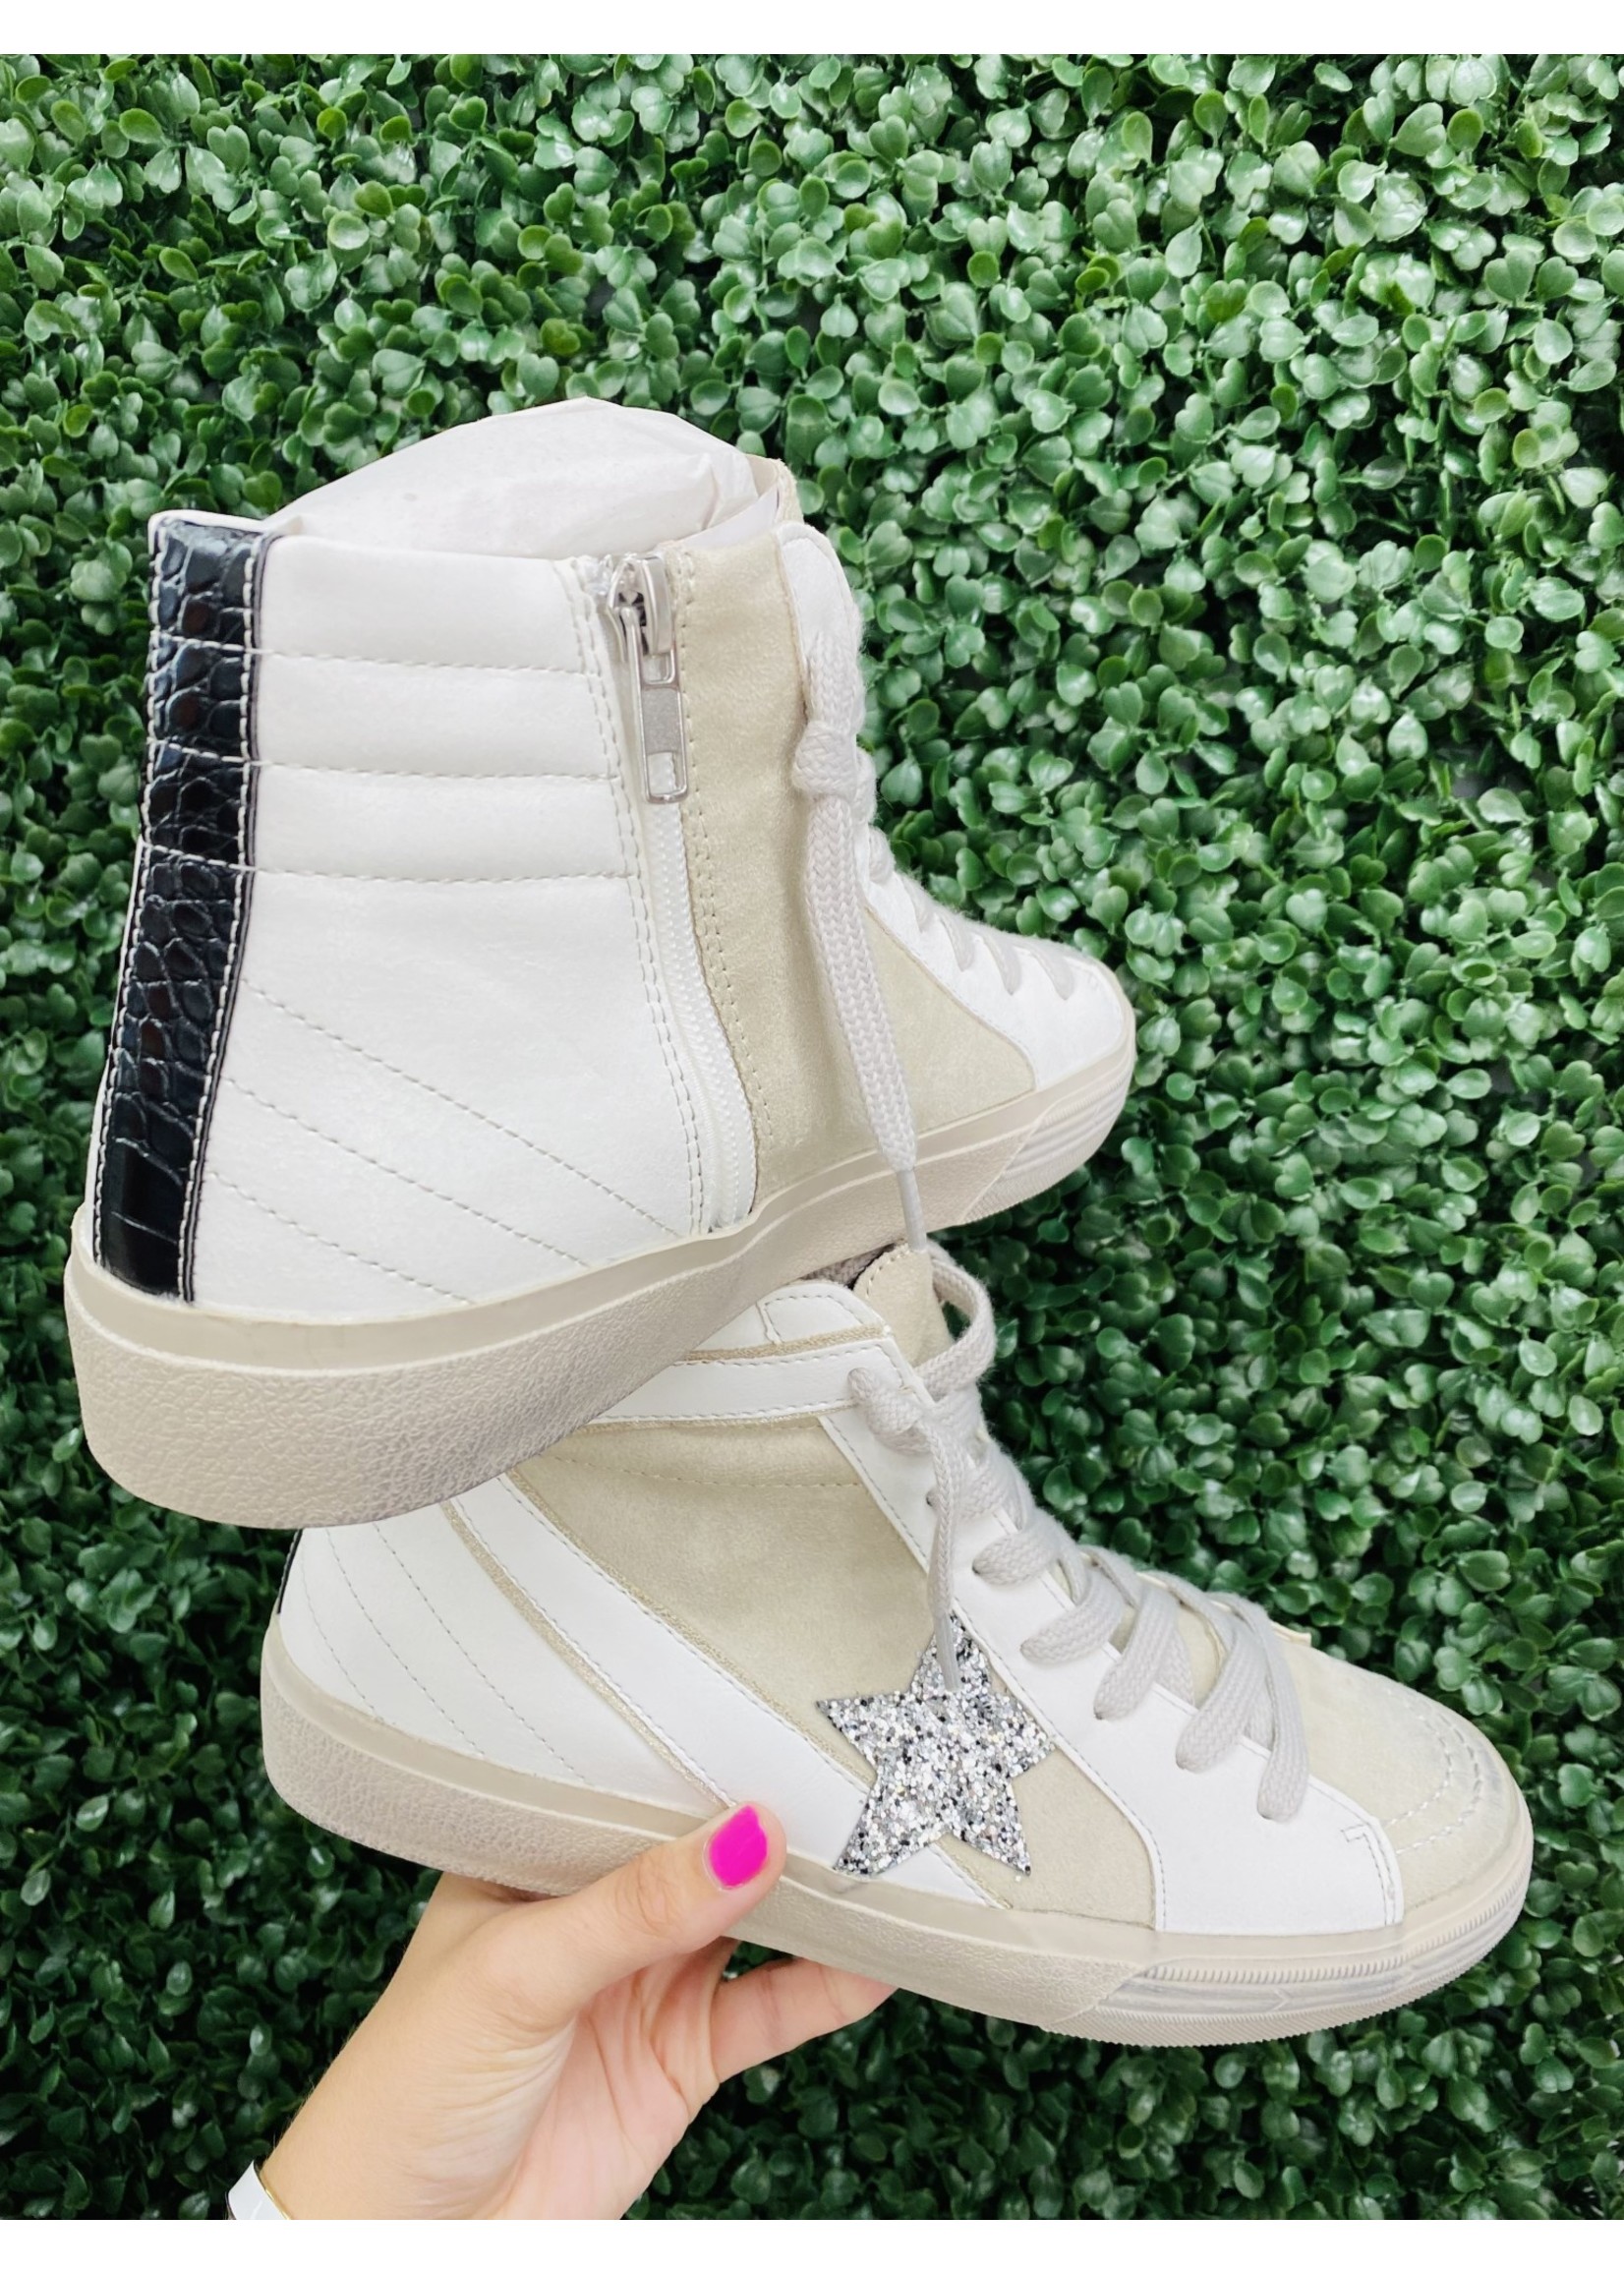 SHUSHOP Passion High Top Sneakers with Zipper Closure